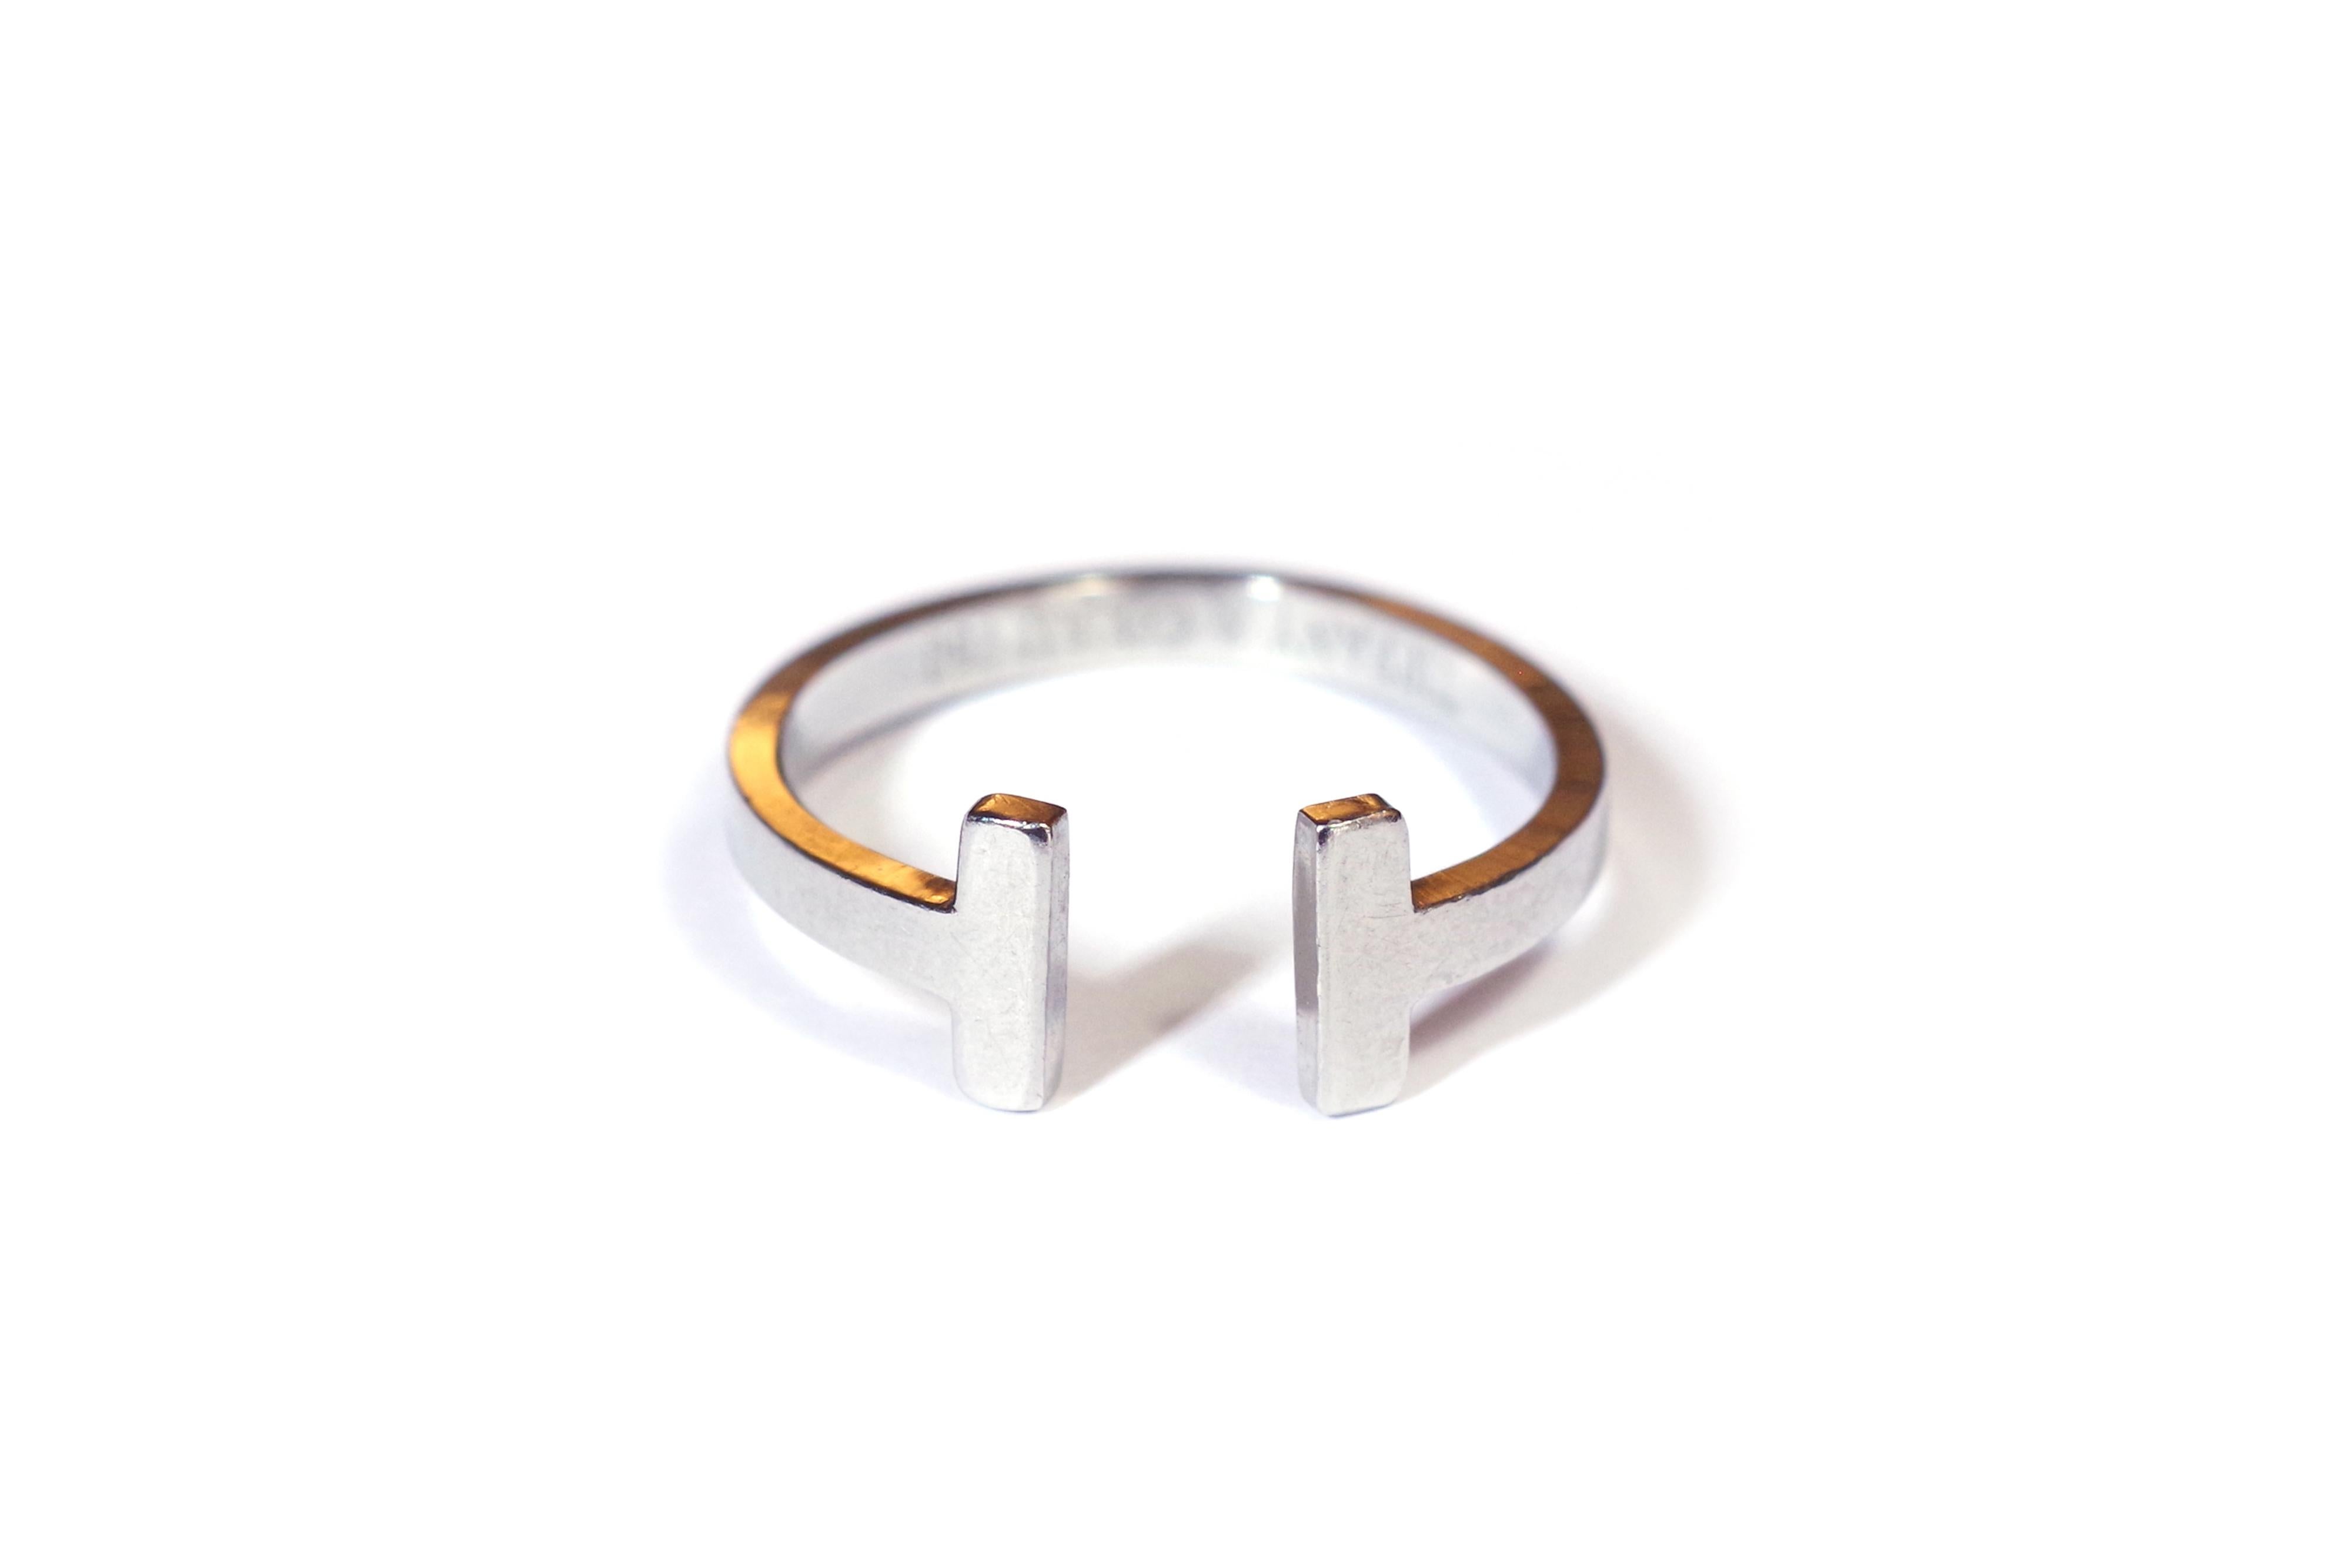 Square Tiffany T ring in 18 karat white gold. Ring Tiffany & Co. model Square T. This torque ring is soberly decorated with a T motif, referring to the initial letter of the Tiffany & Co. brand. Vintage ring signed Tiffany & Co. 

Marked on the